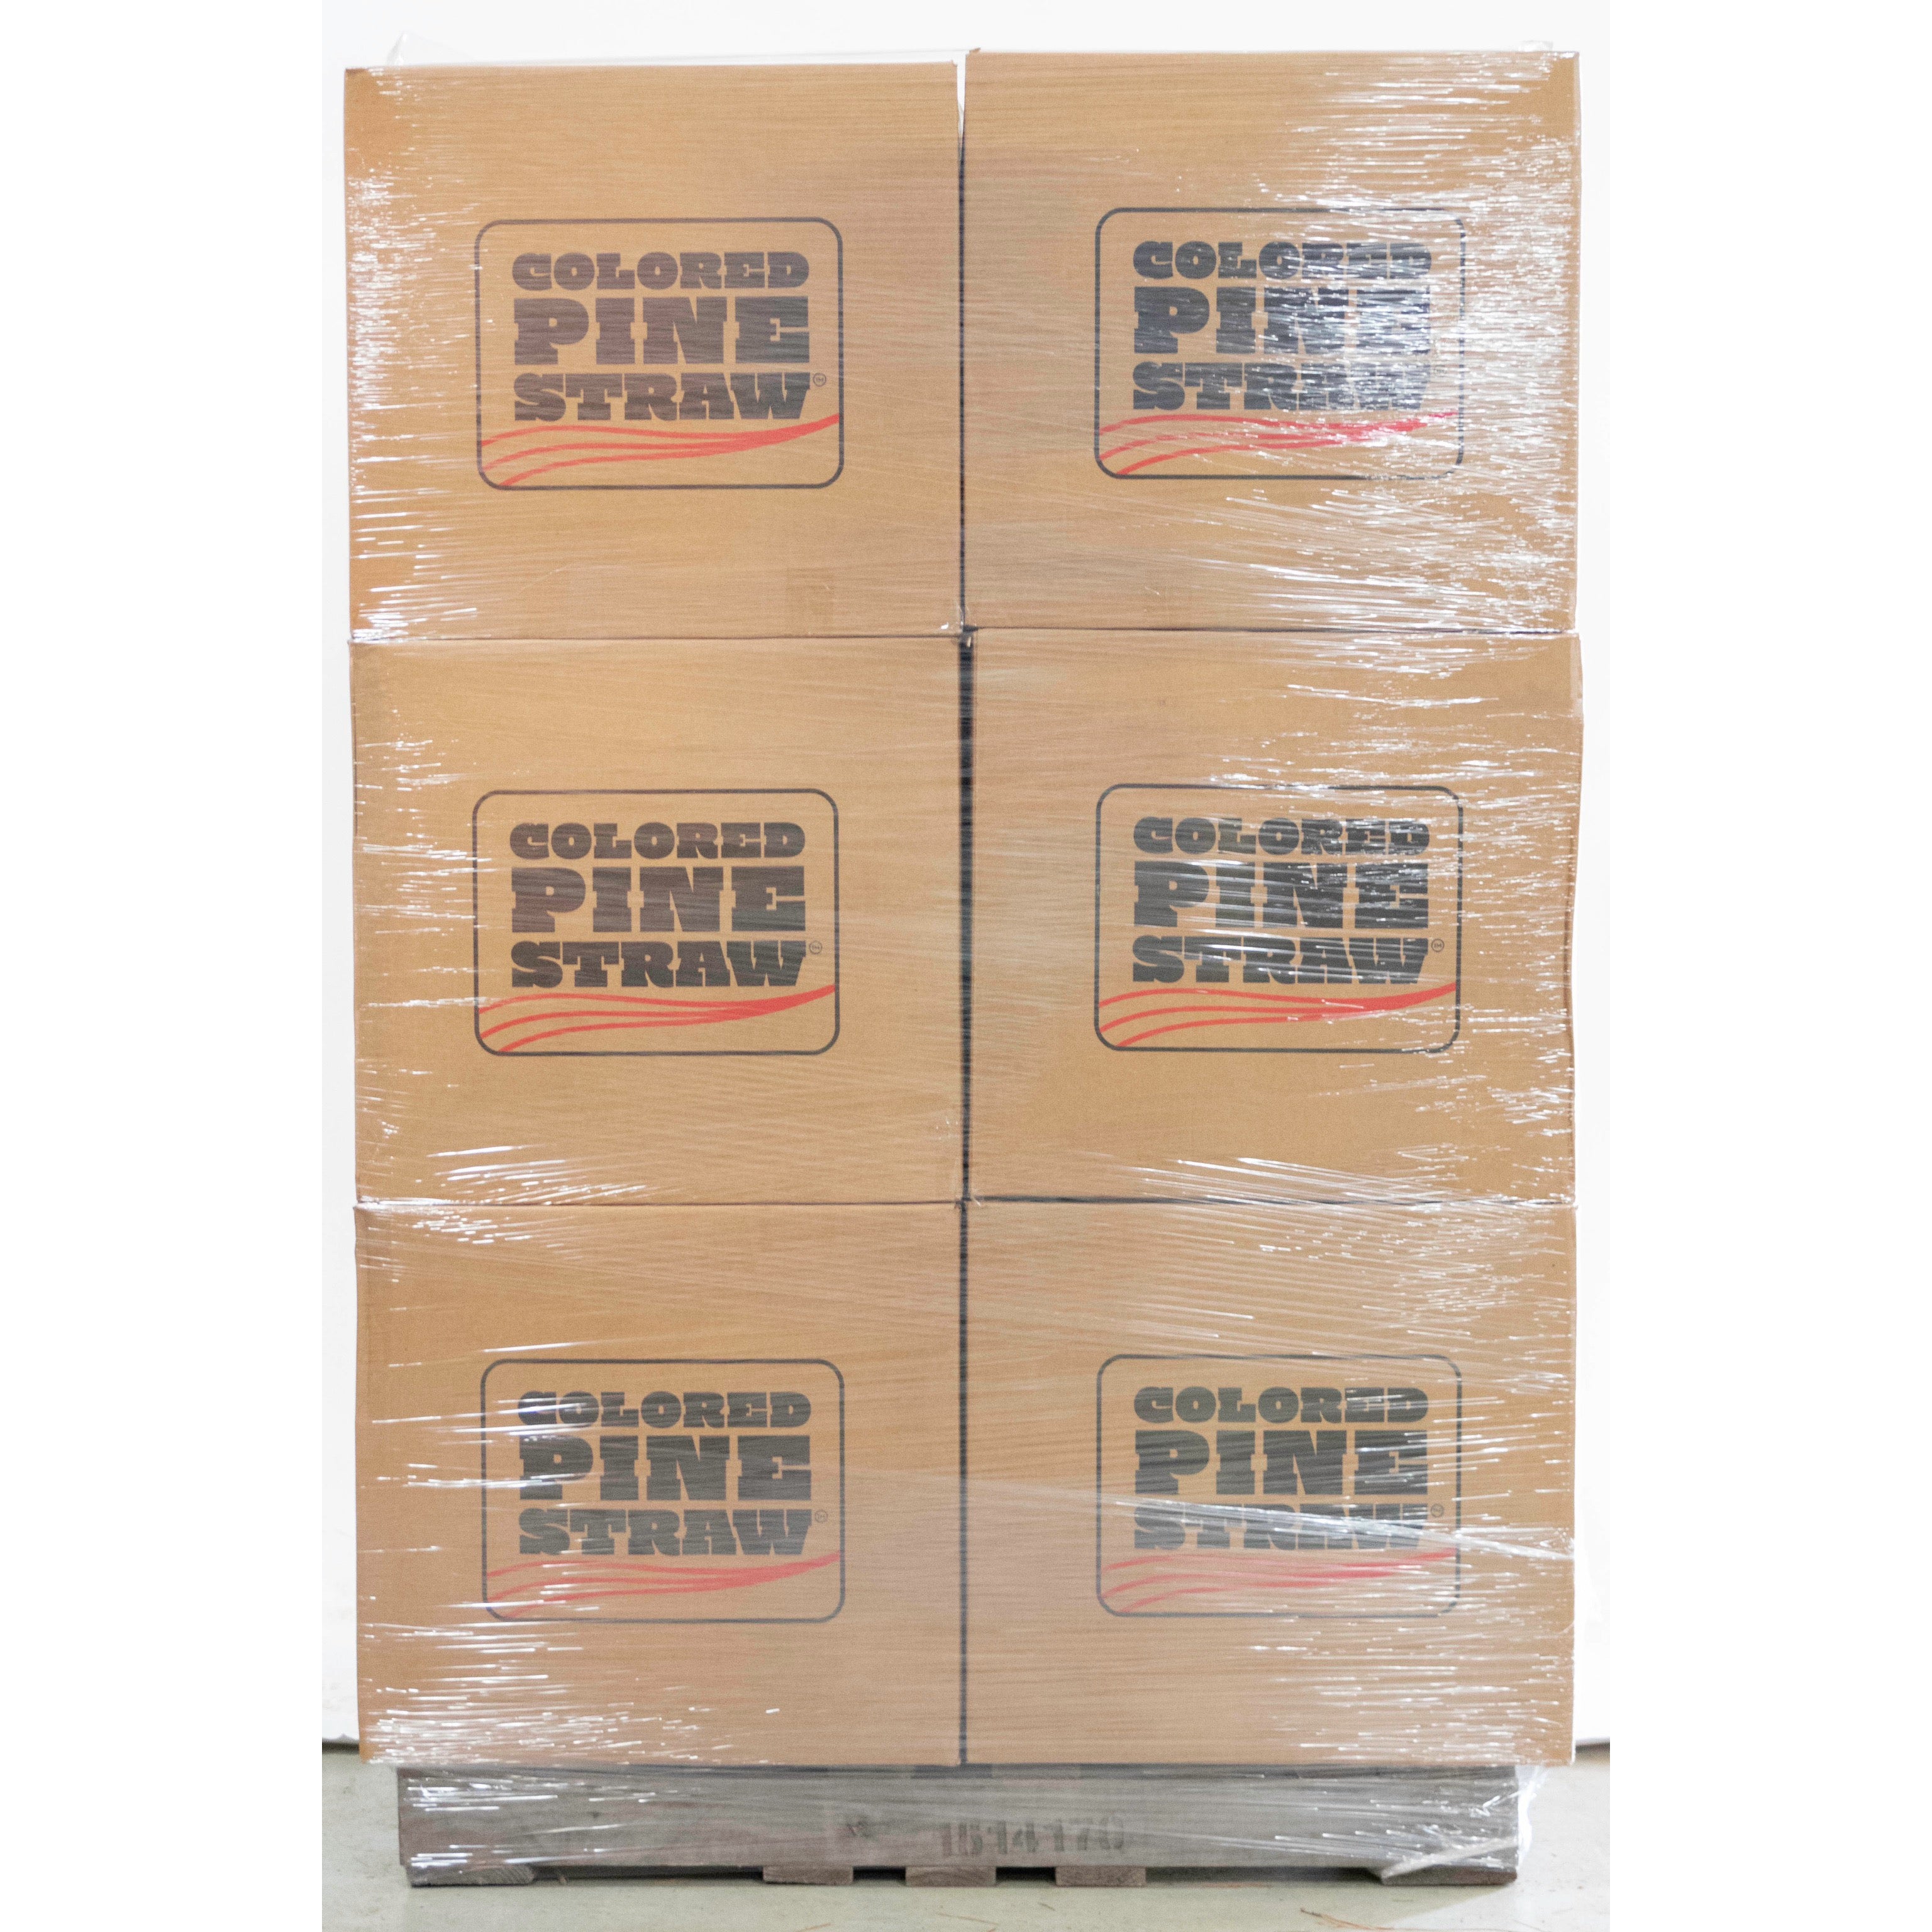 Twelve palletized boxes of loose Colored Pine Straw